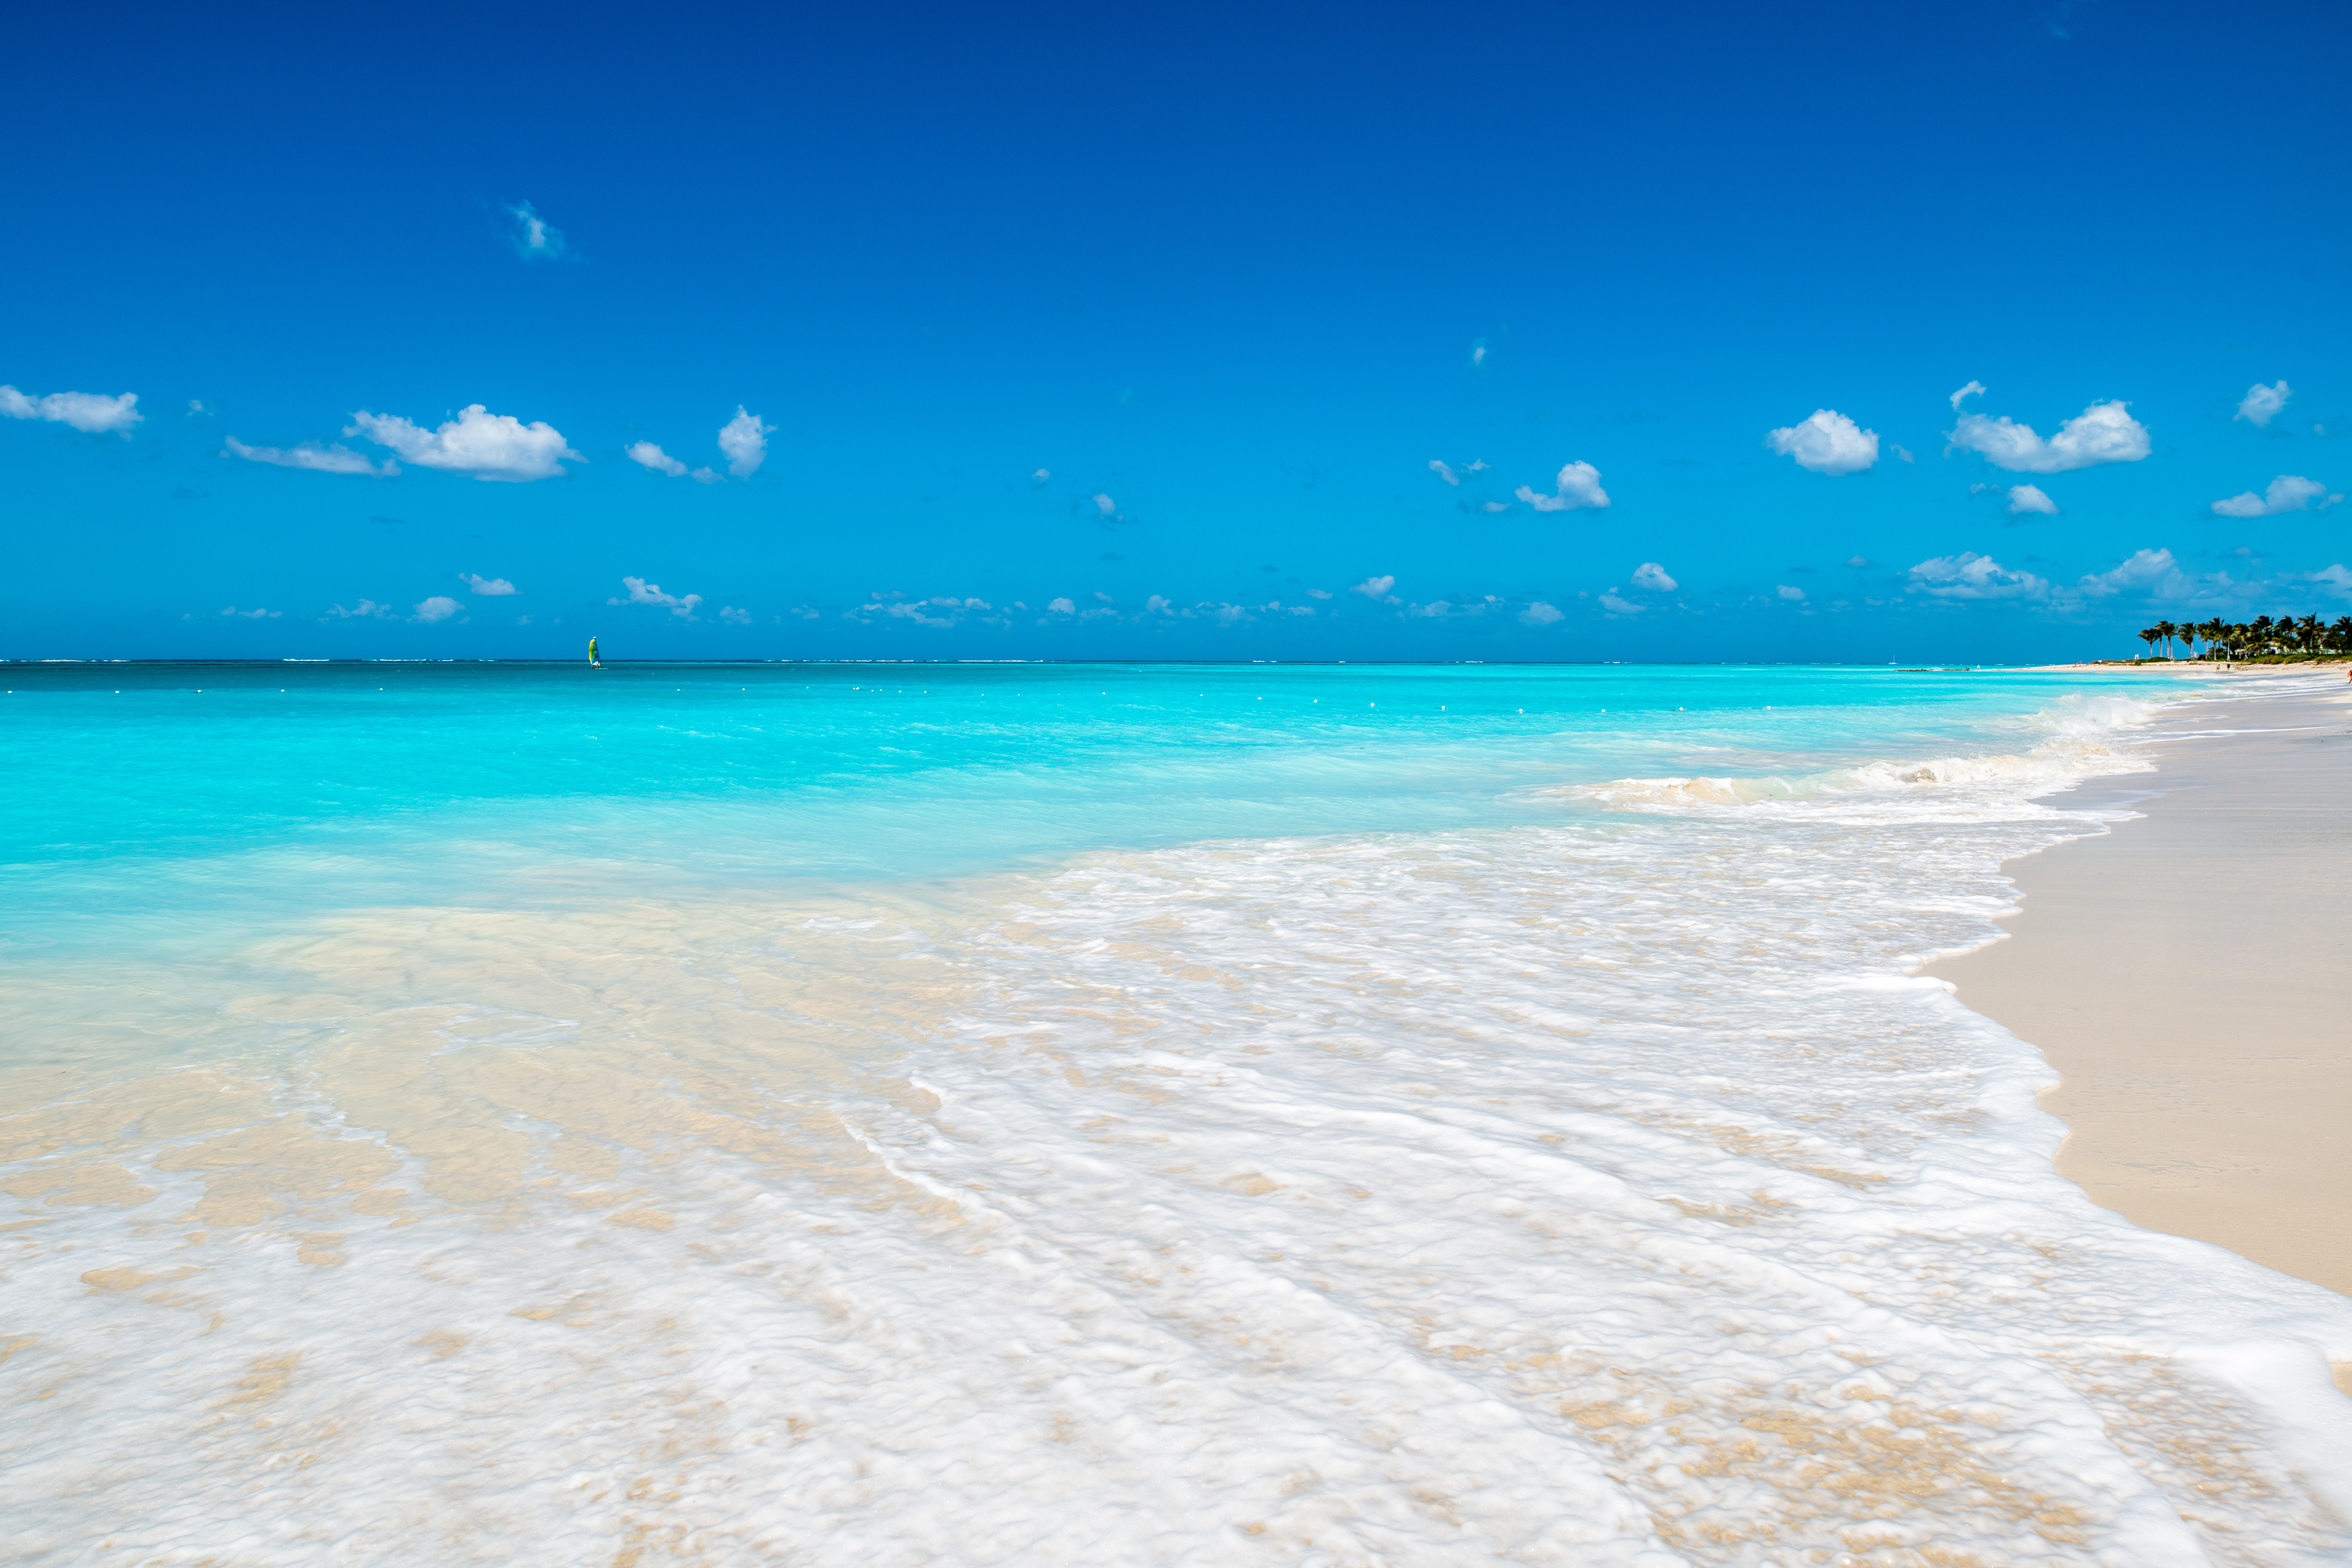 Drop everything and check out the 10 best beaches around the world